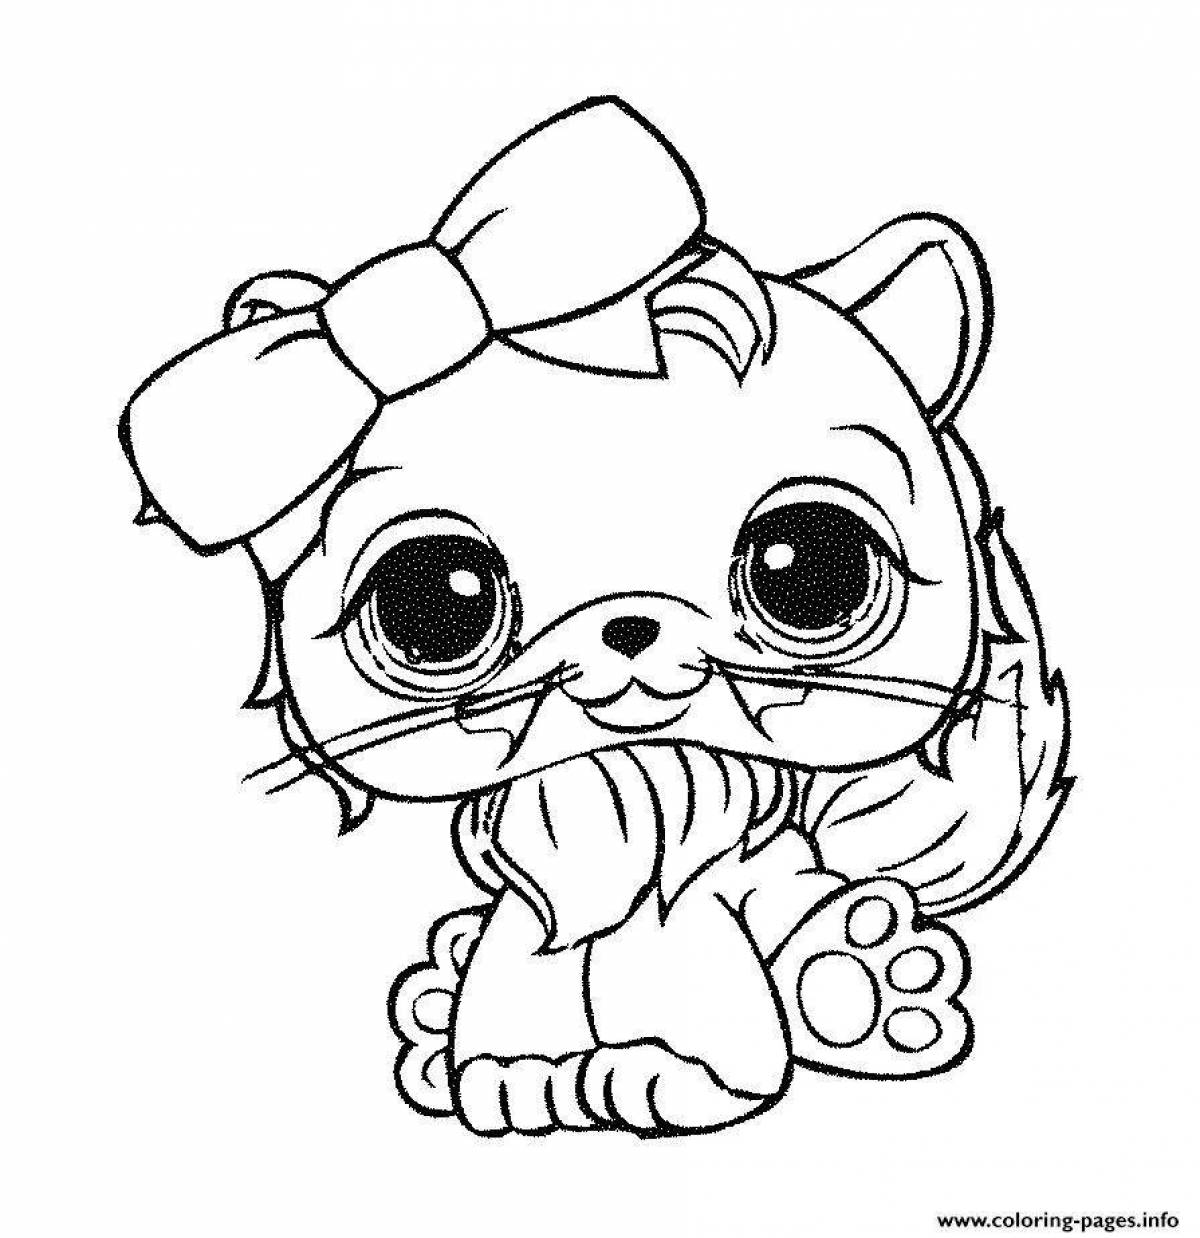 Cute lps coloring page